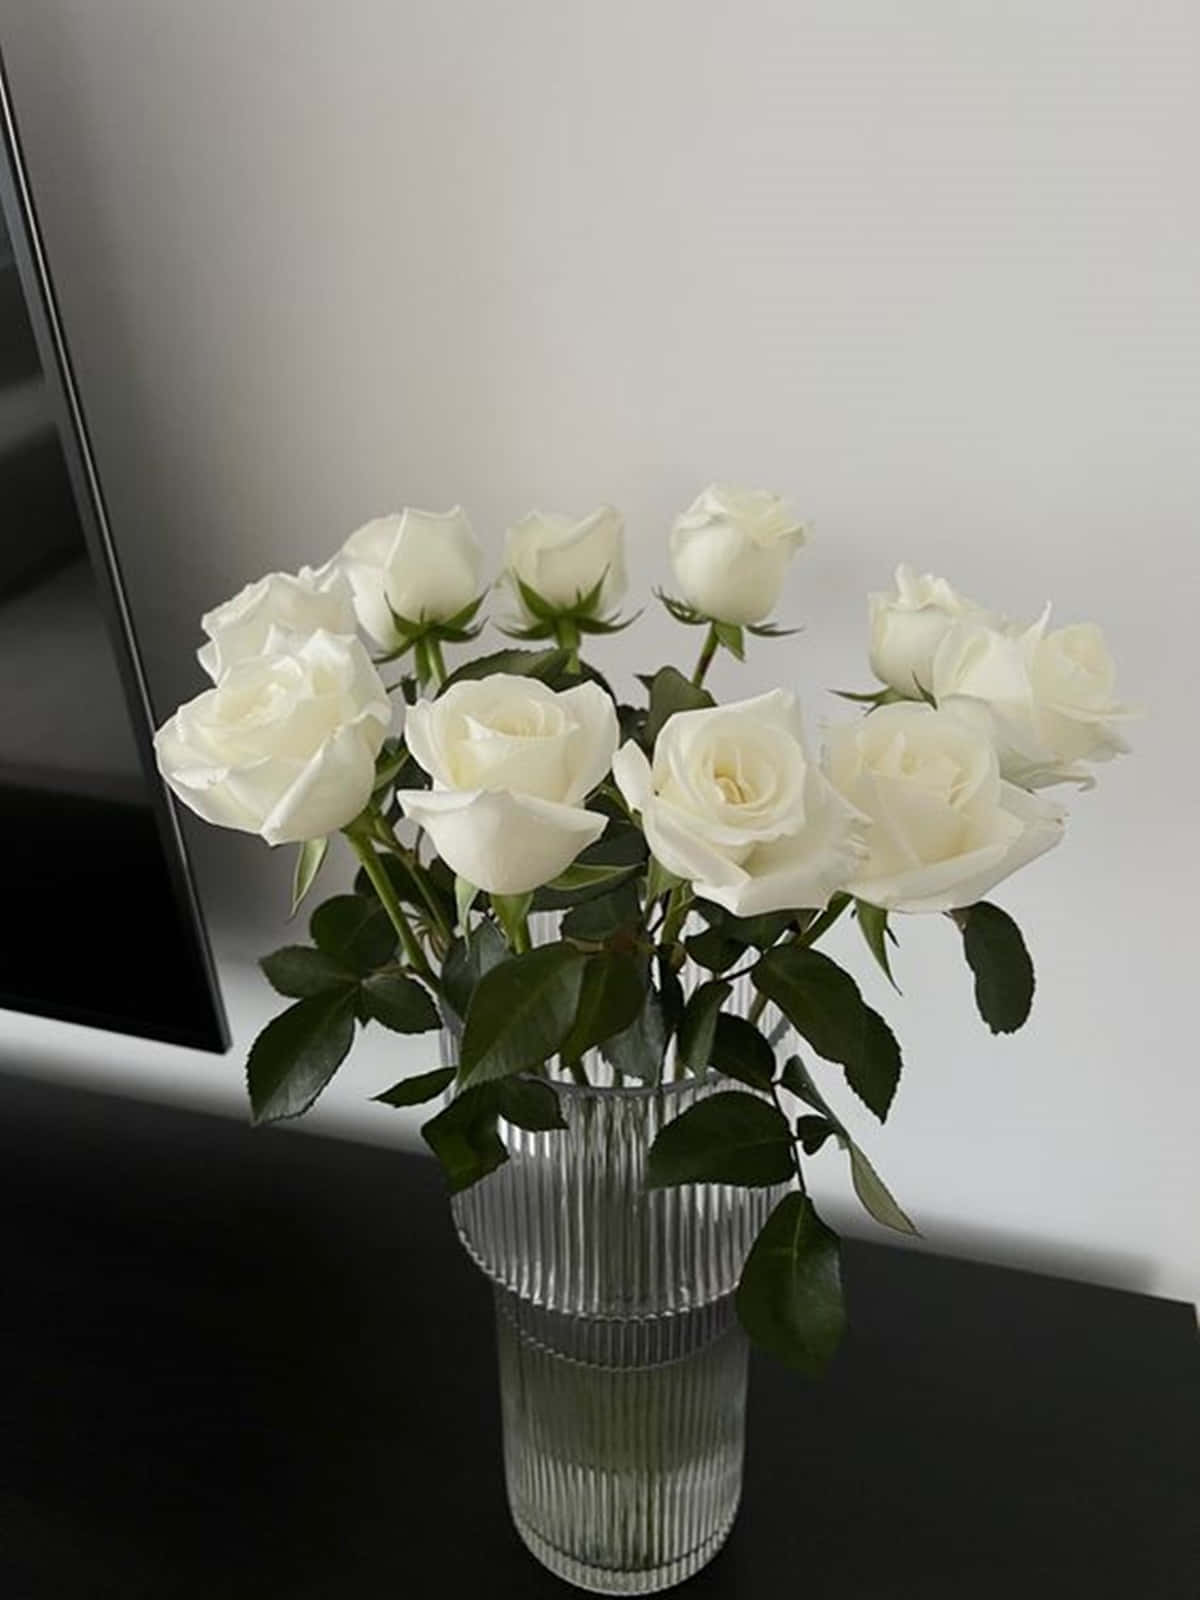 A dainty White Rose showing its beauty and elegance. Wallpaper